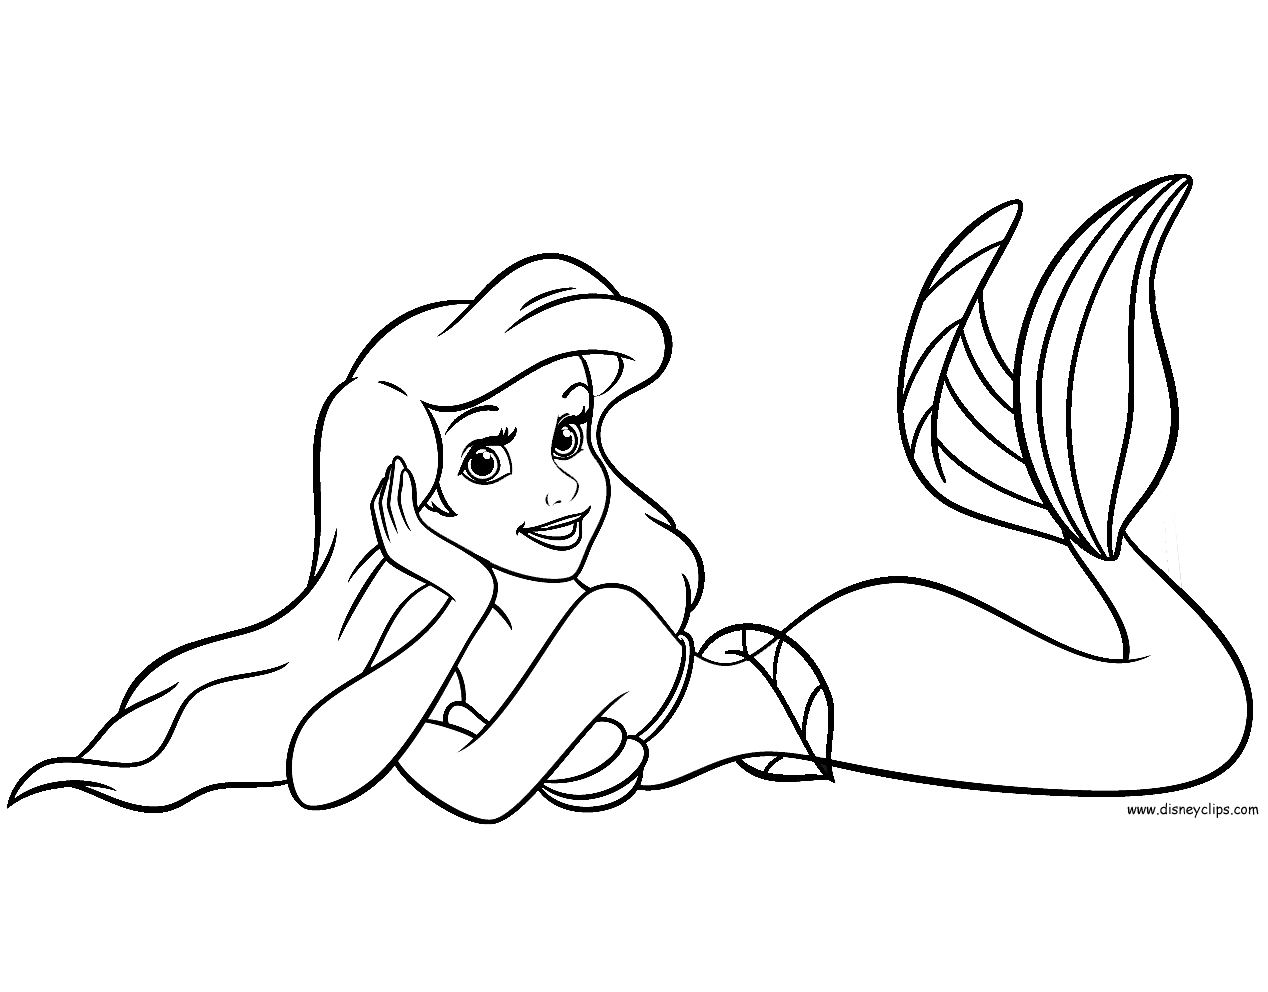 The Little Mermaid Printable Coloring Pages 3  Disney Coloring Book